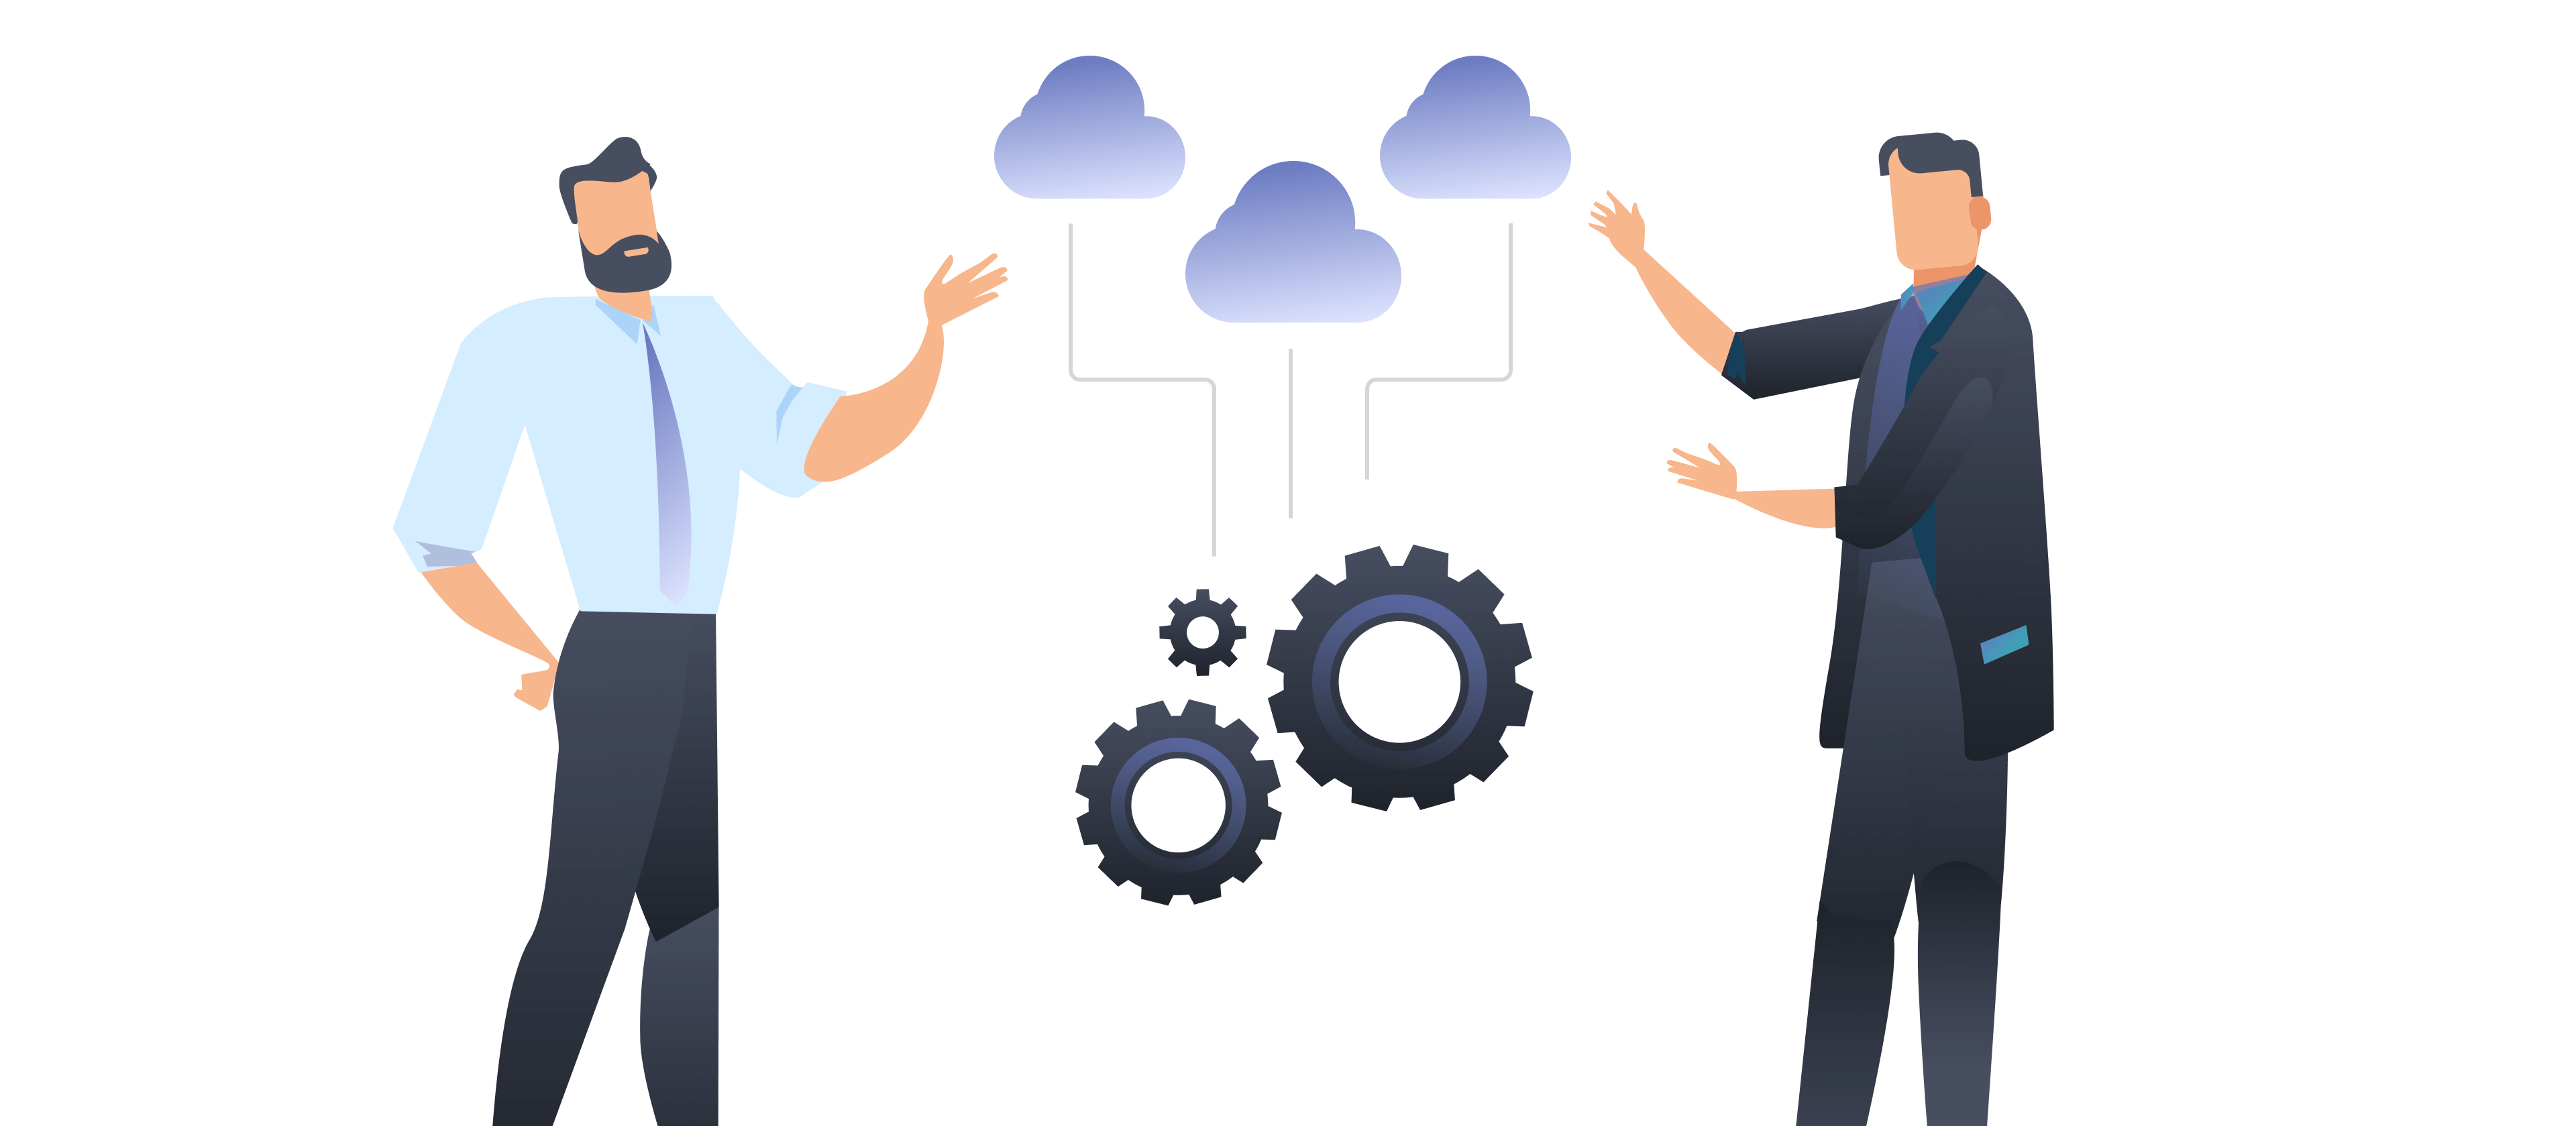 Planning our multi-cloud approach - image